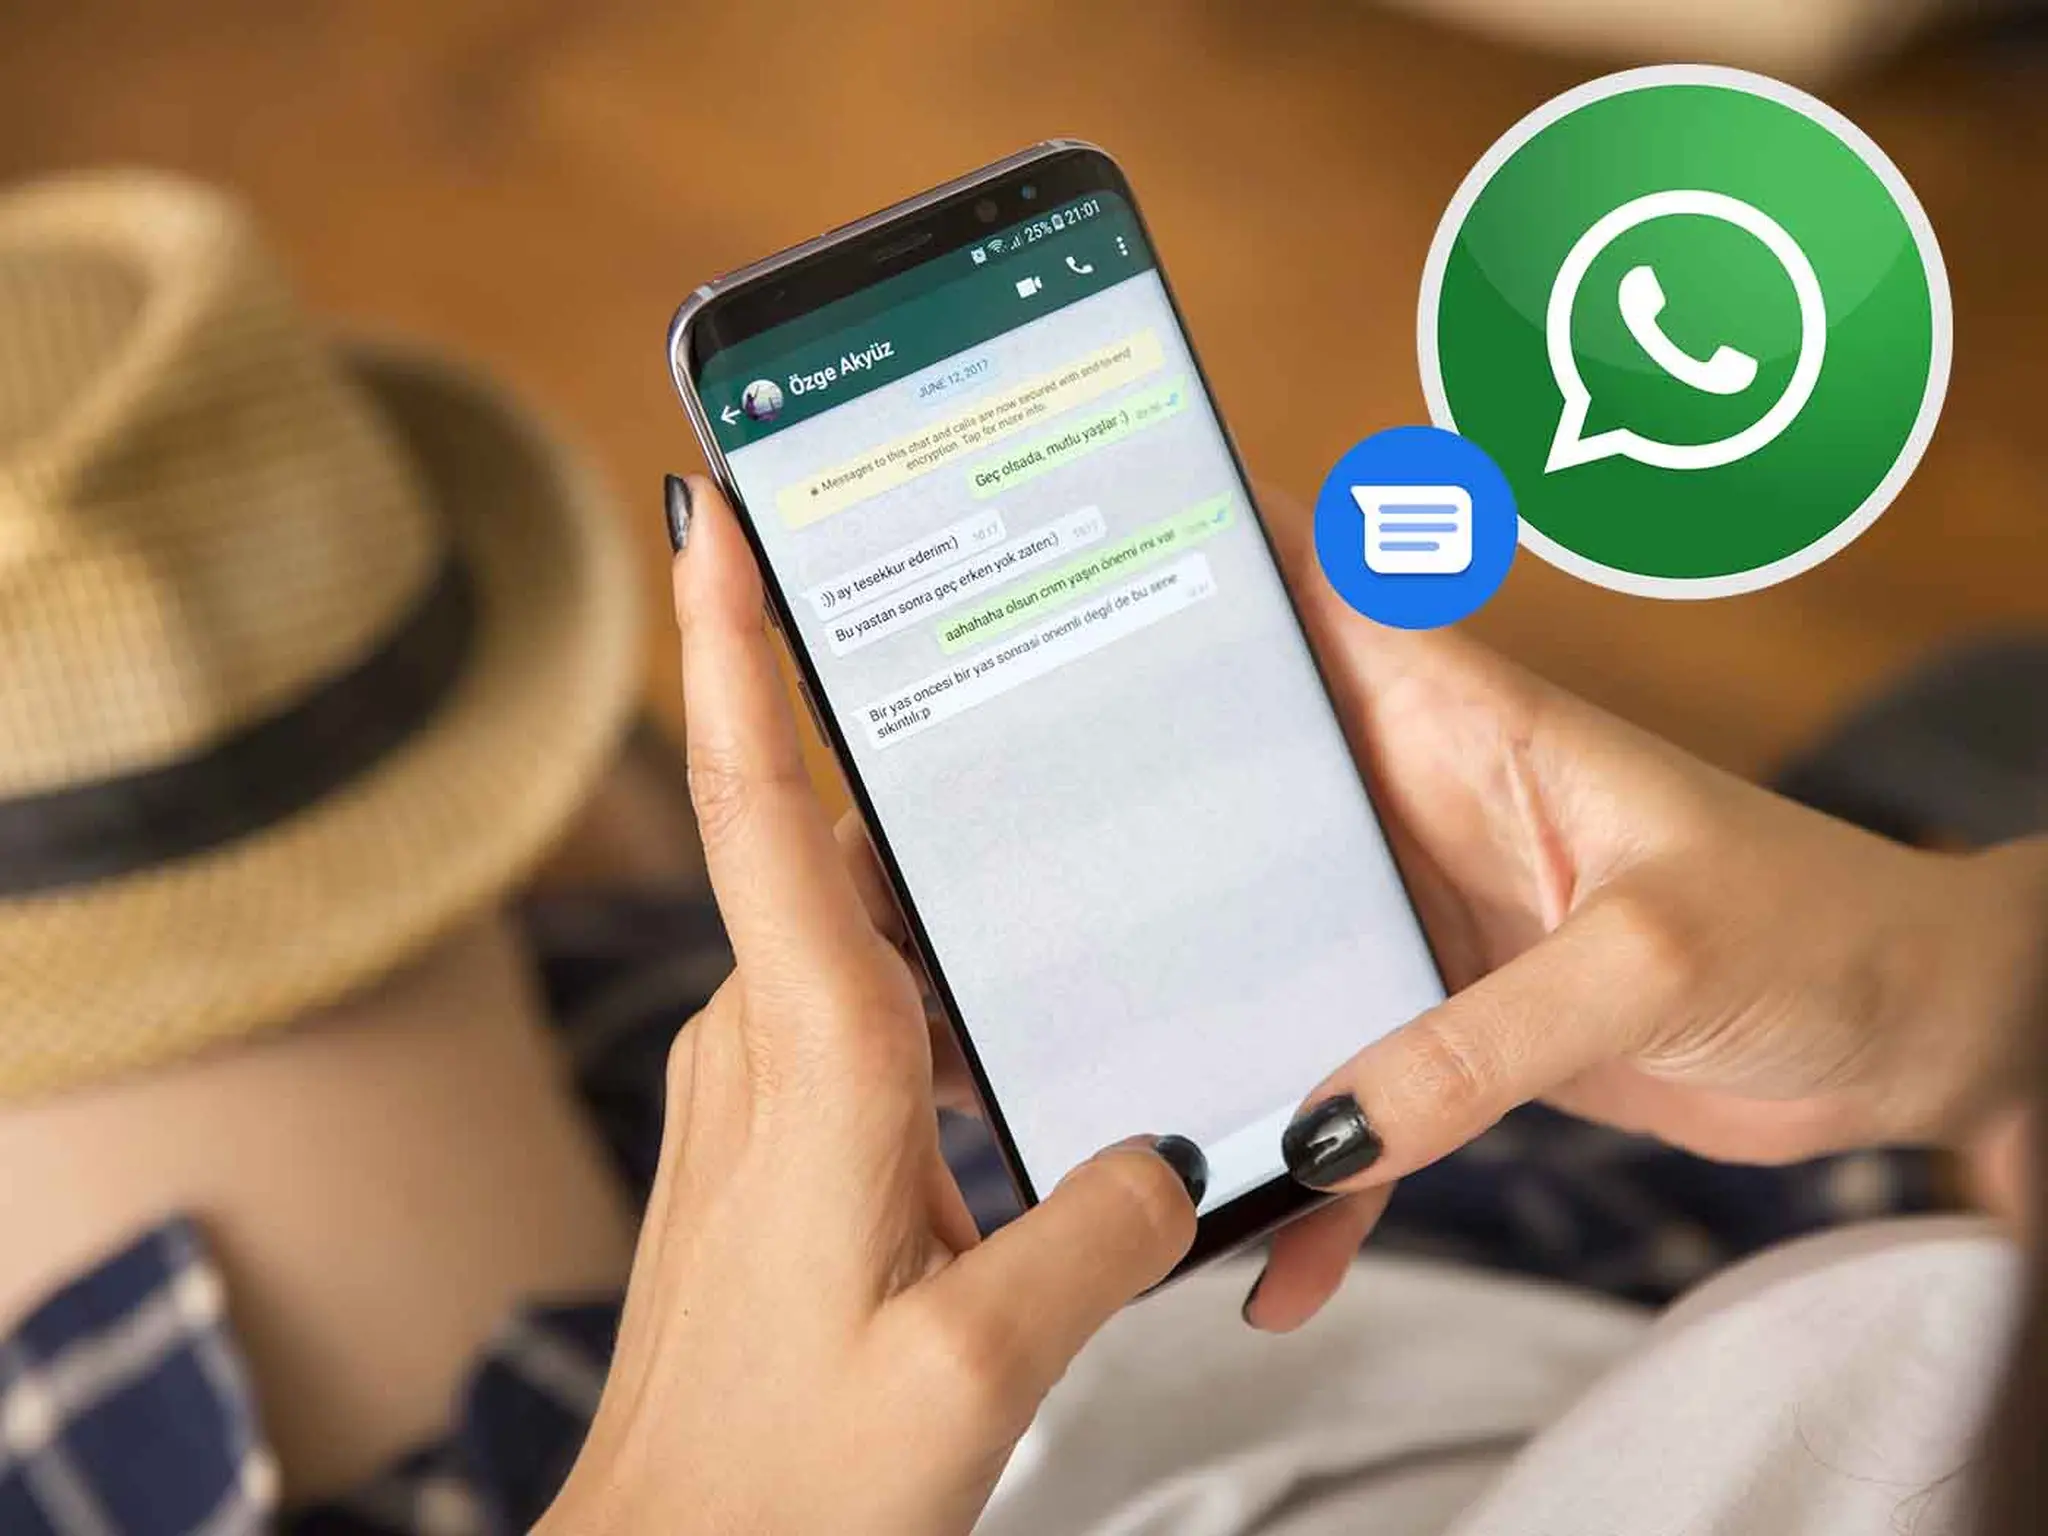 WhatsApp reveals details of its new update for searching within messages